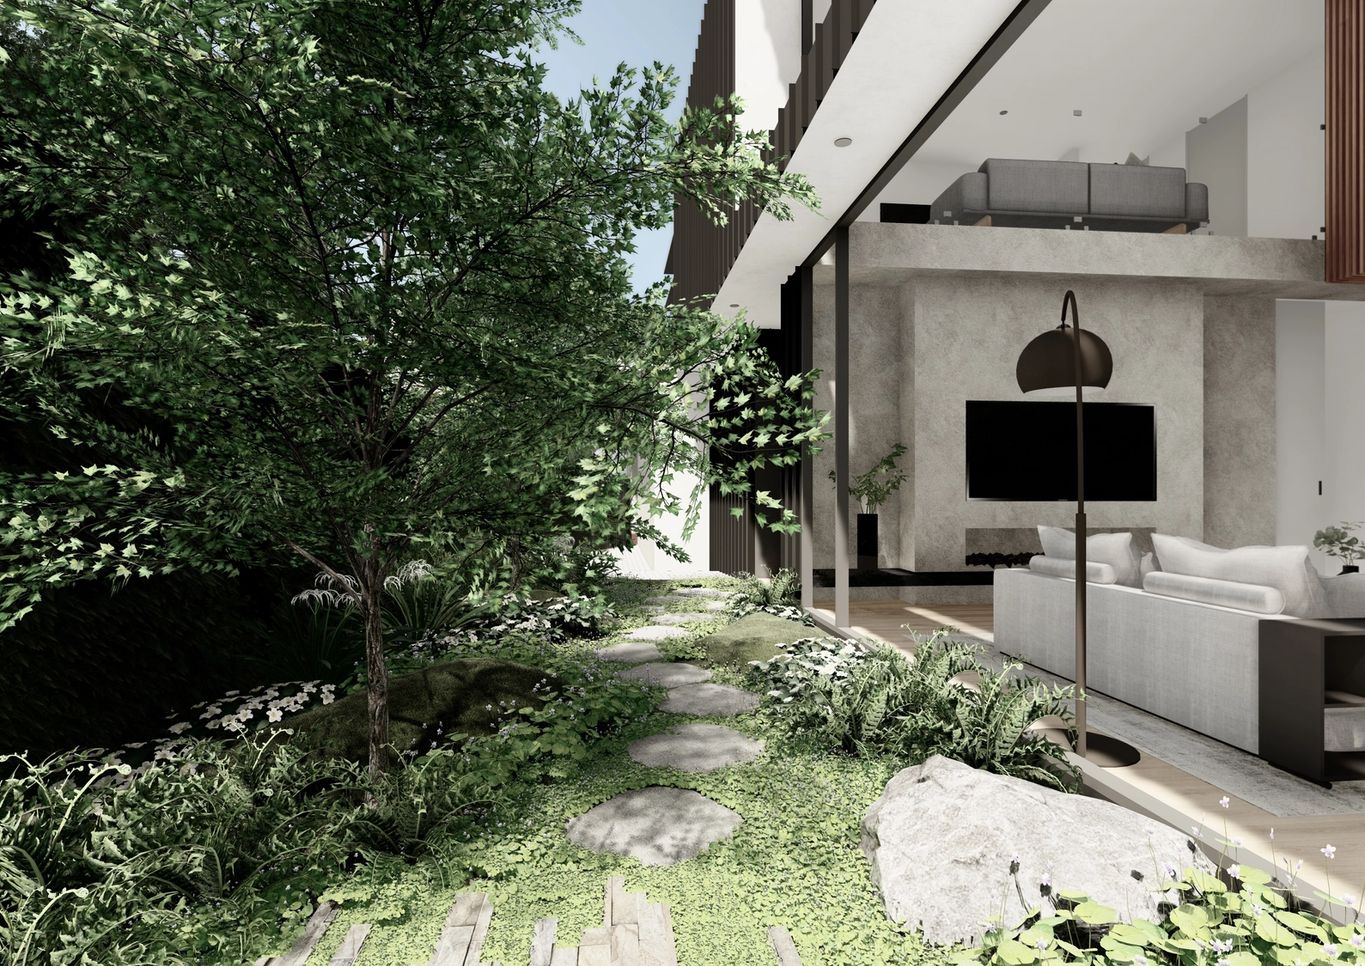 Indoor outdoor integrated landscape design in Camberwell landscape project with Sky Architect Studio